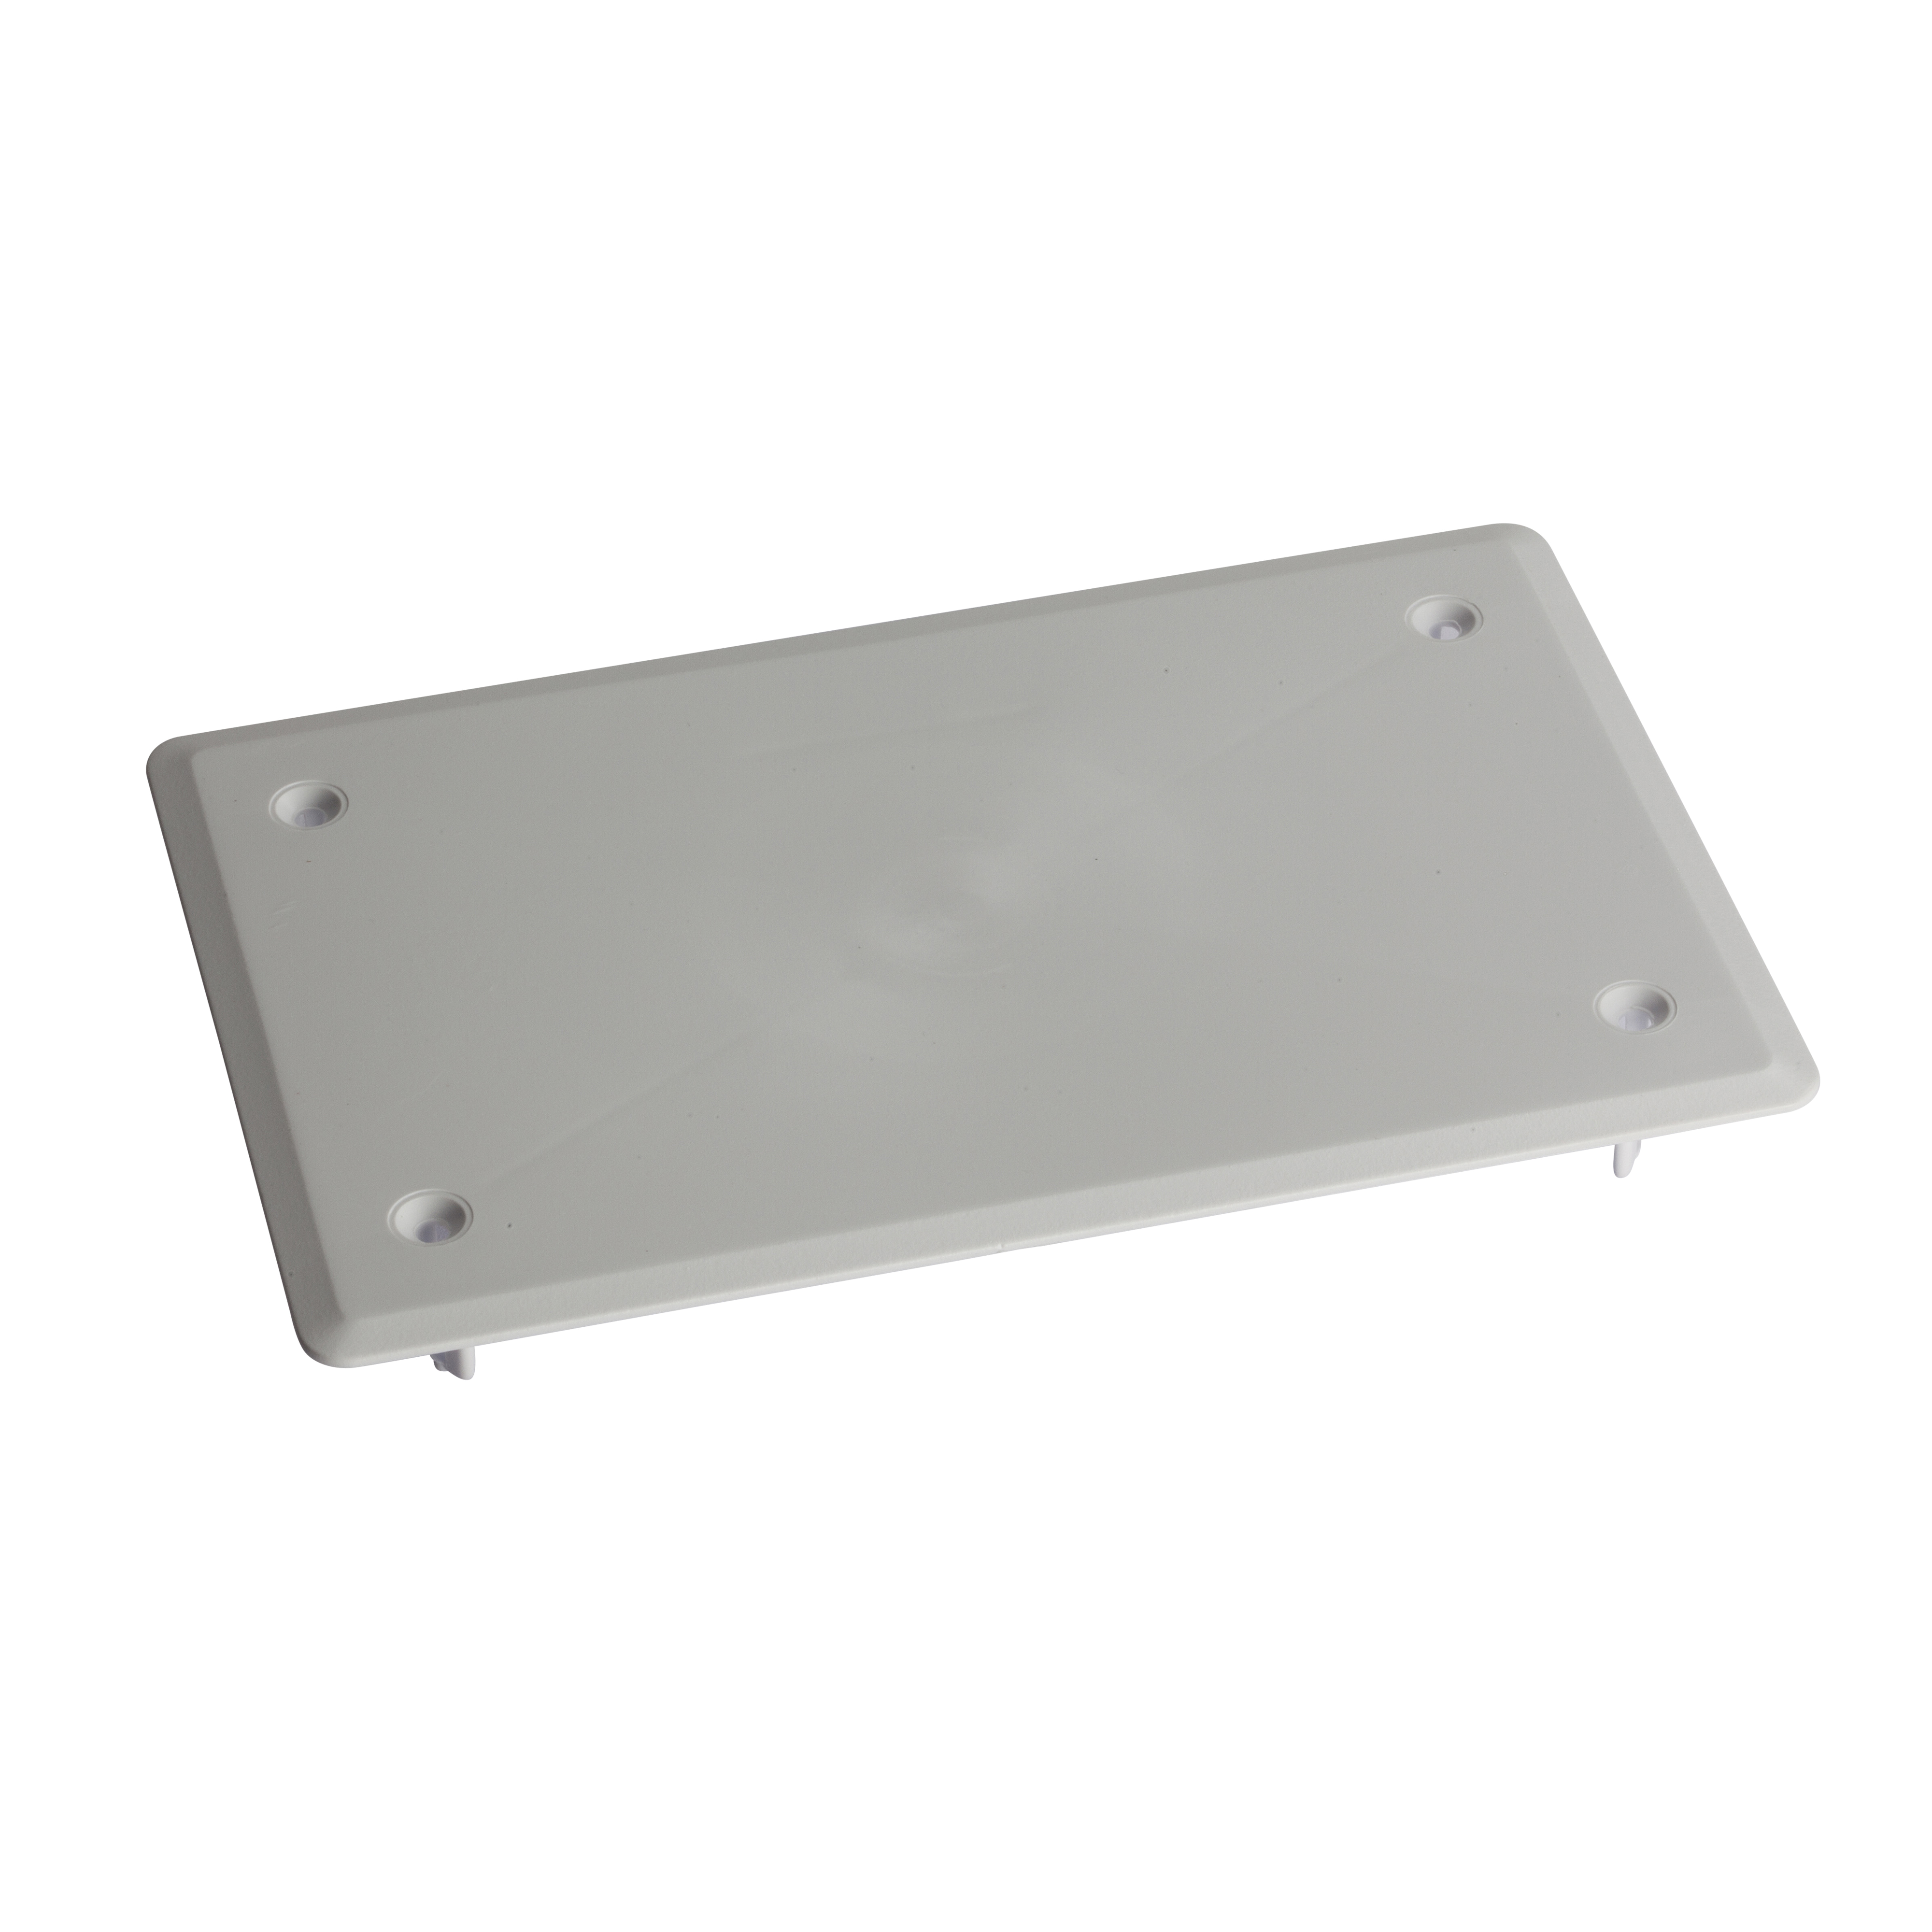 Schneider Electric 1 Gang Cover Plate